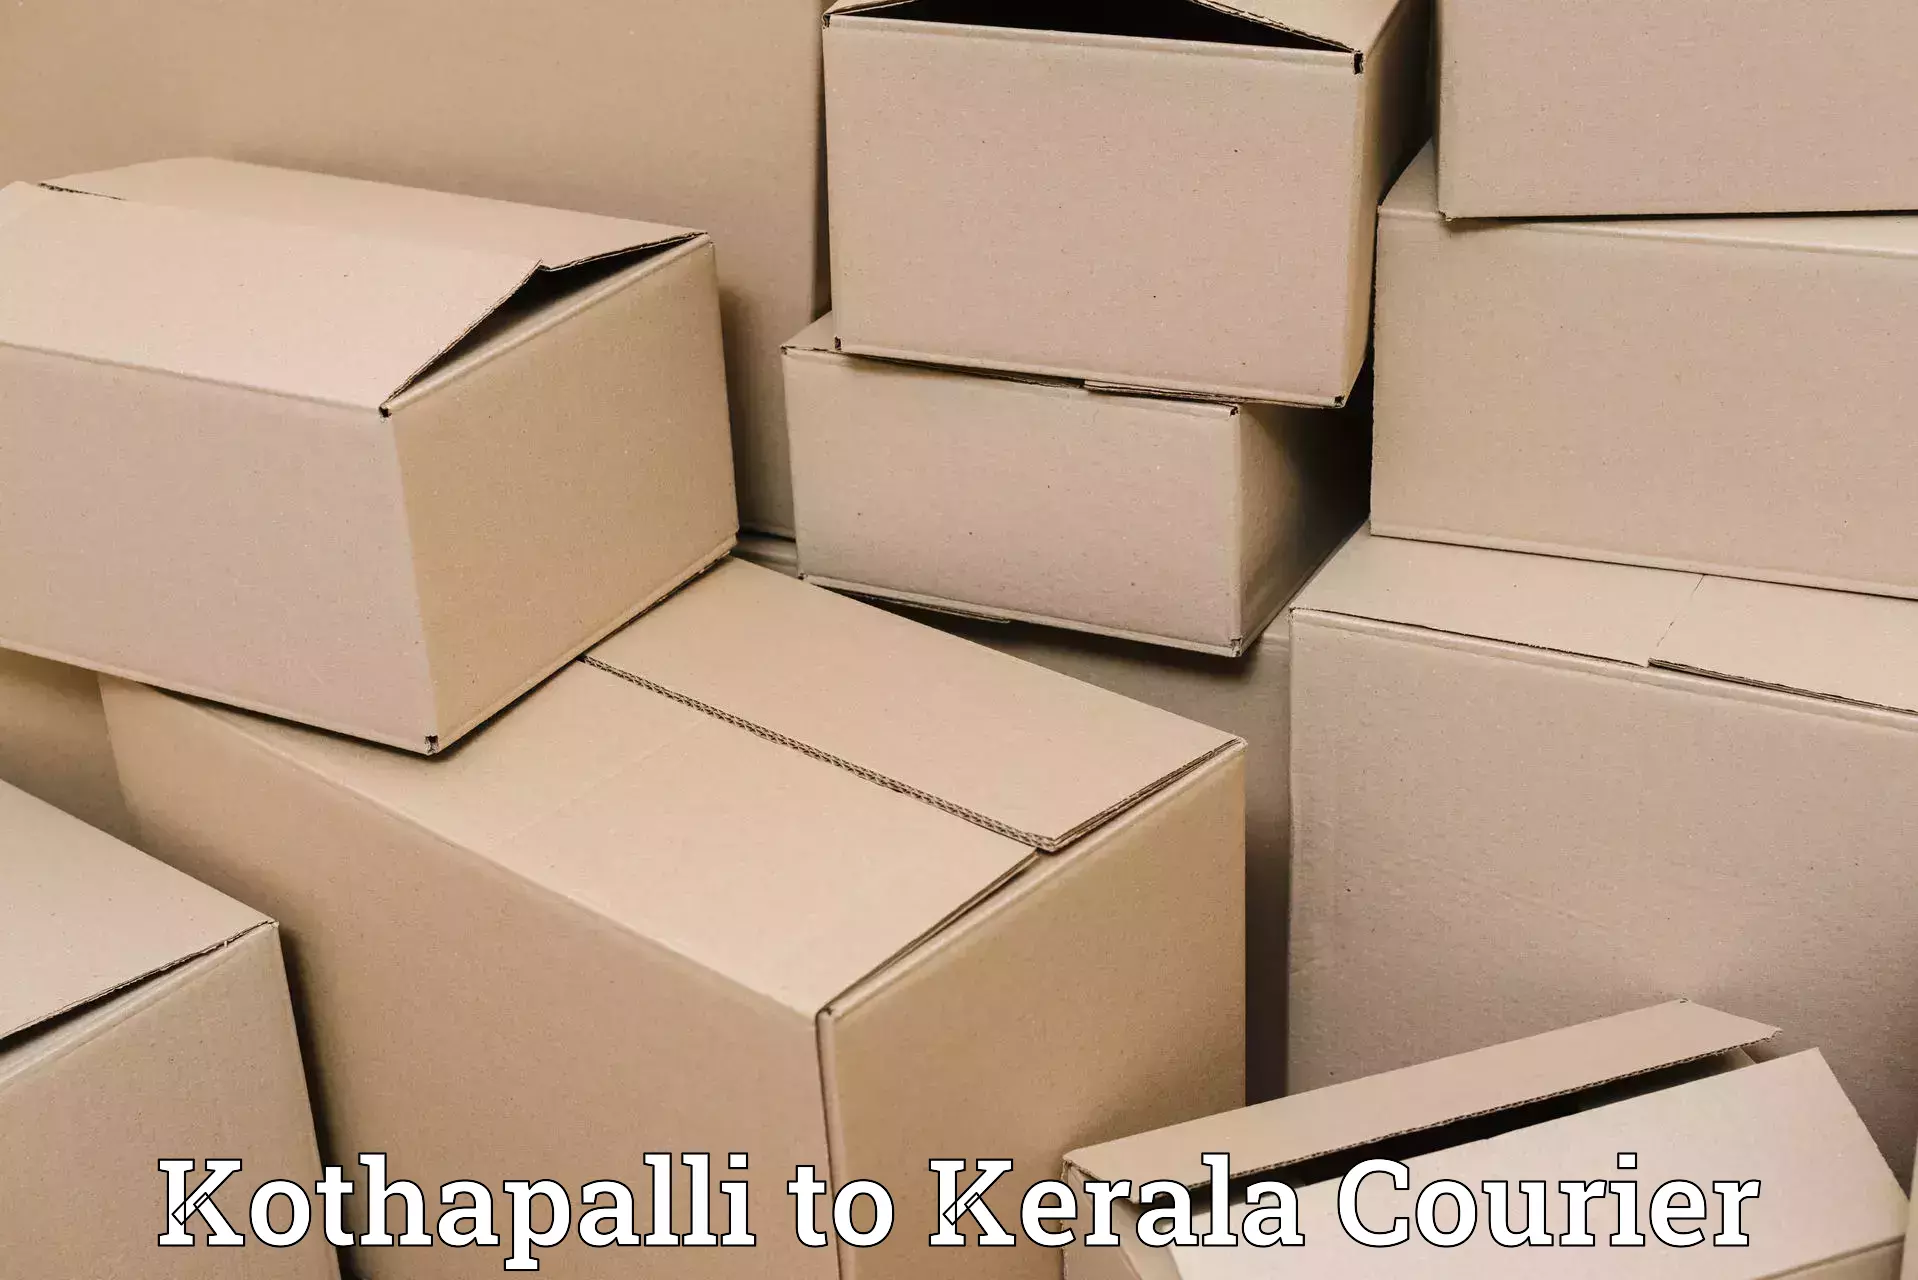 Express package services Kothapalli to Cochin Port Kochi